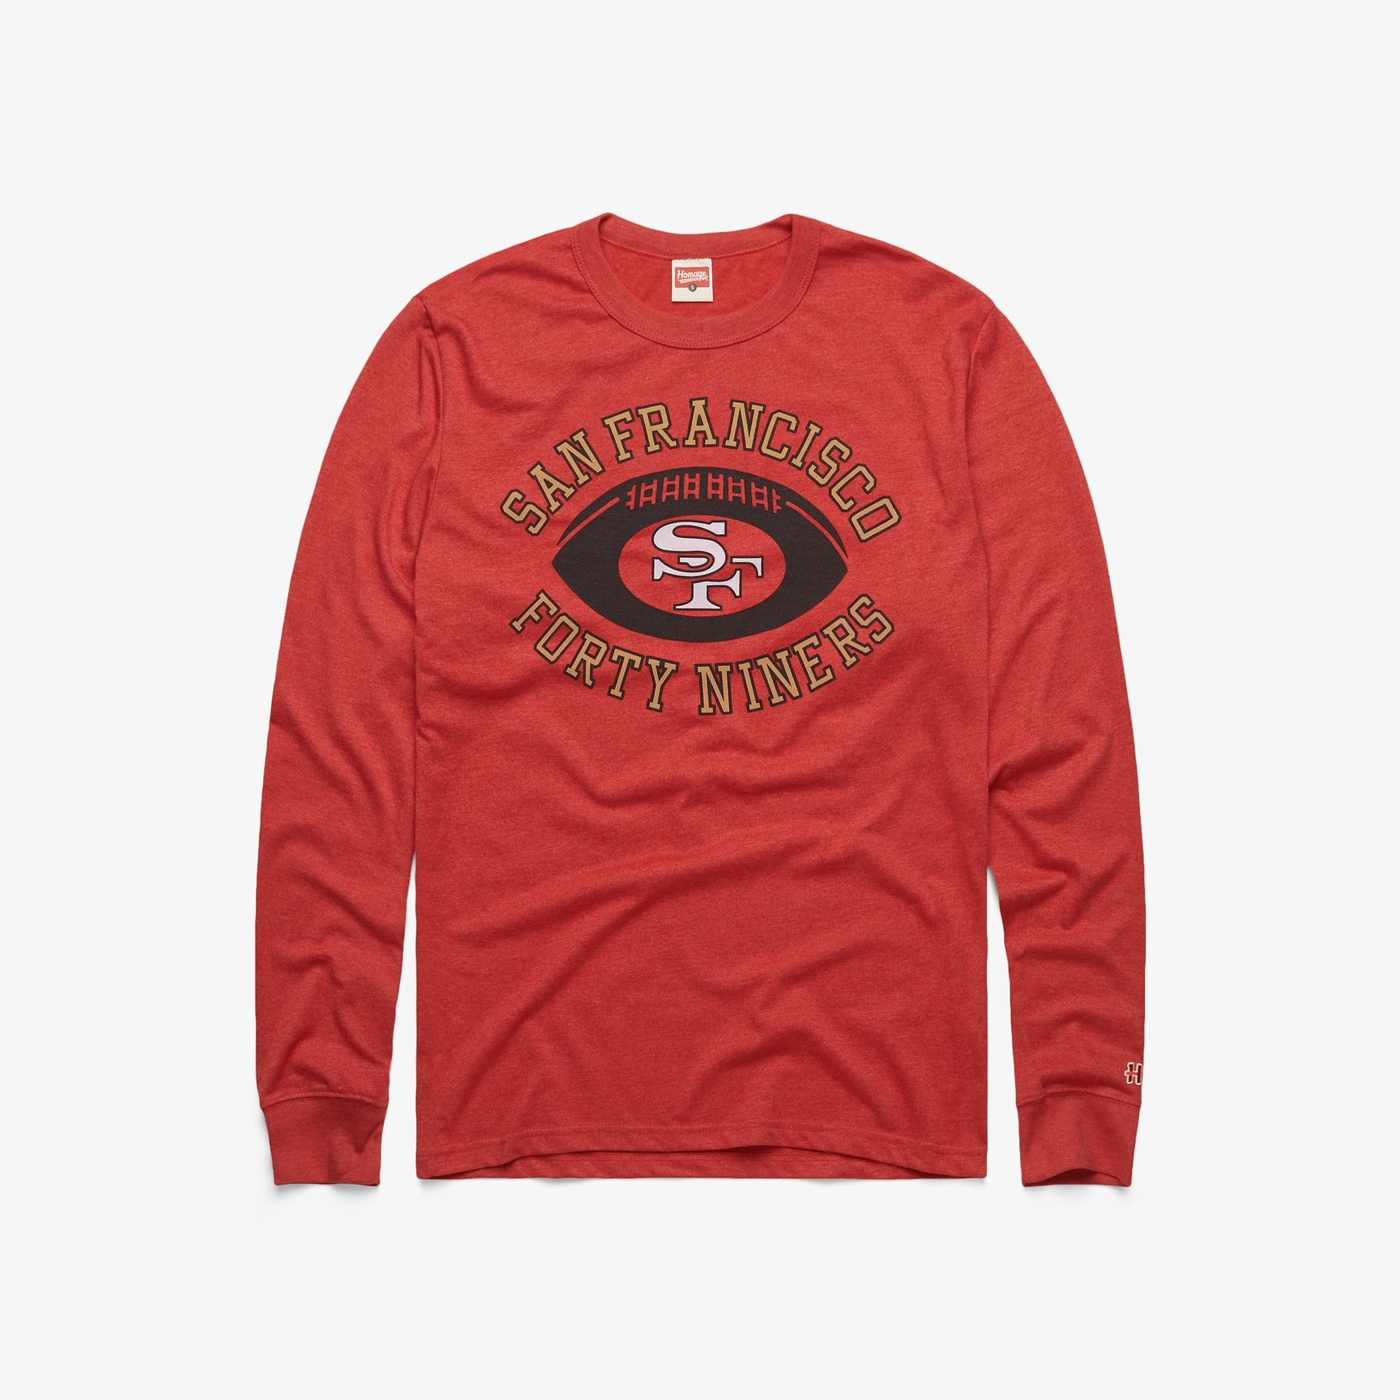 NFL AND 49ERS VINTAGE